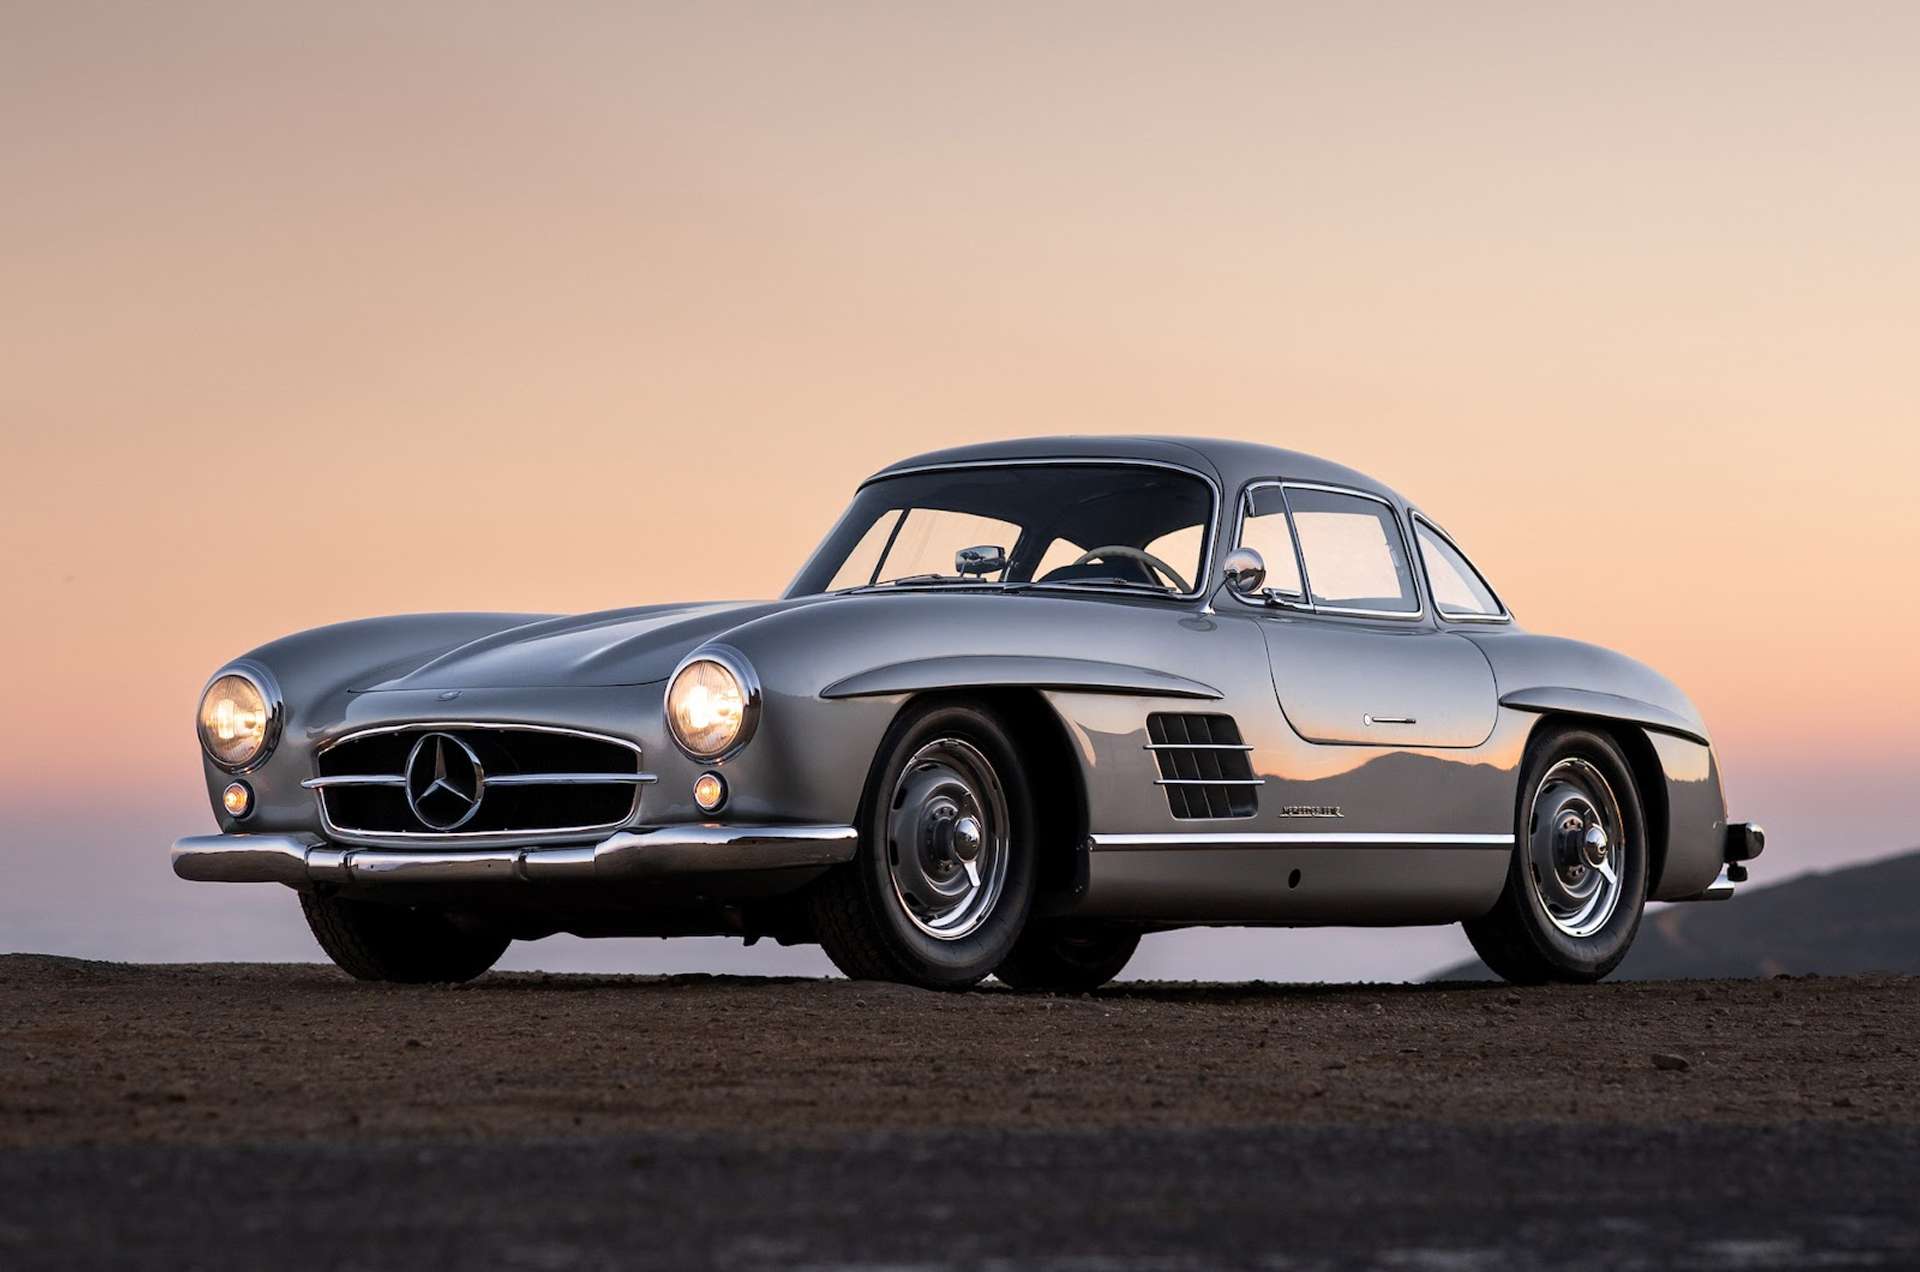 1955 silver Mercedes-Benz 300 SL Alloy Gullwing against a sunset background.